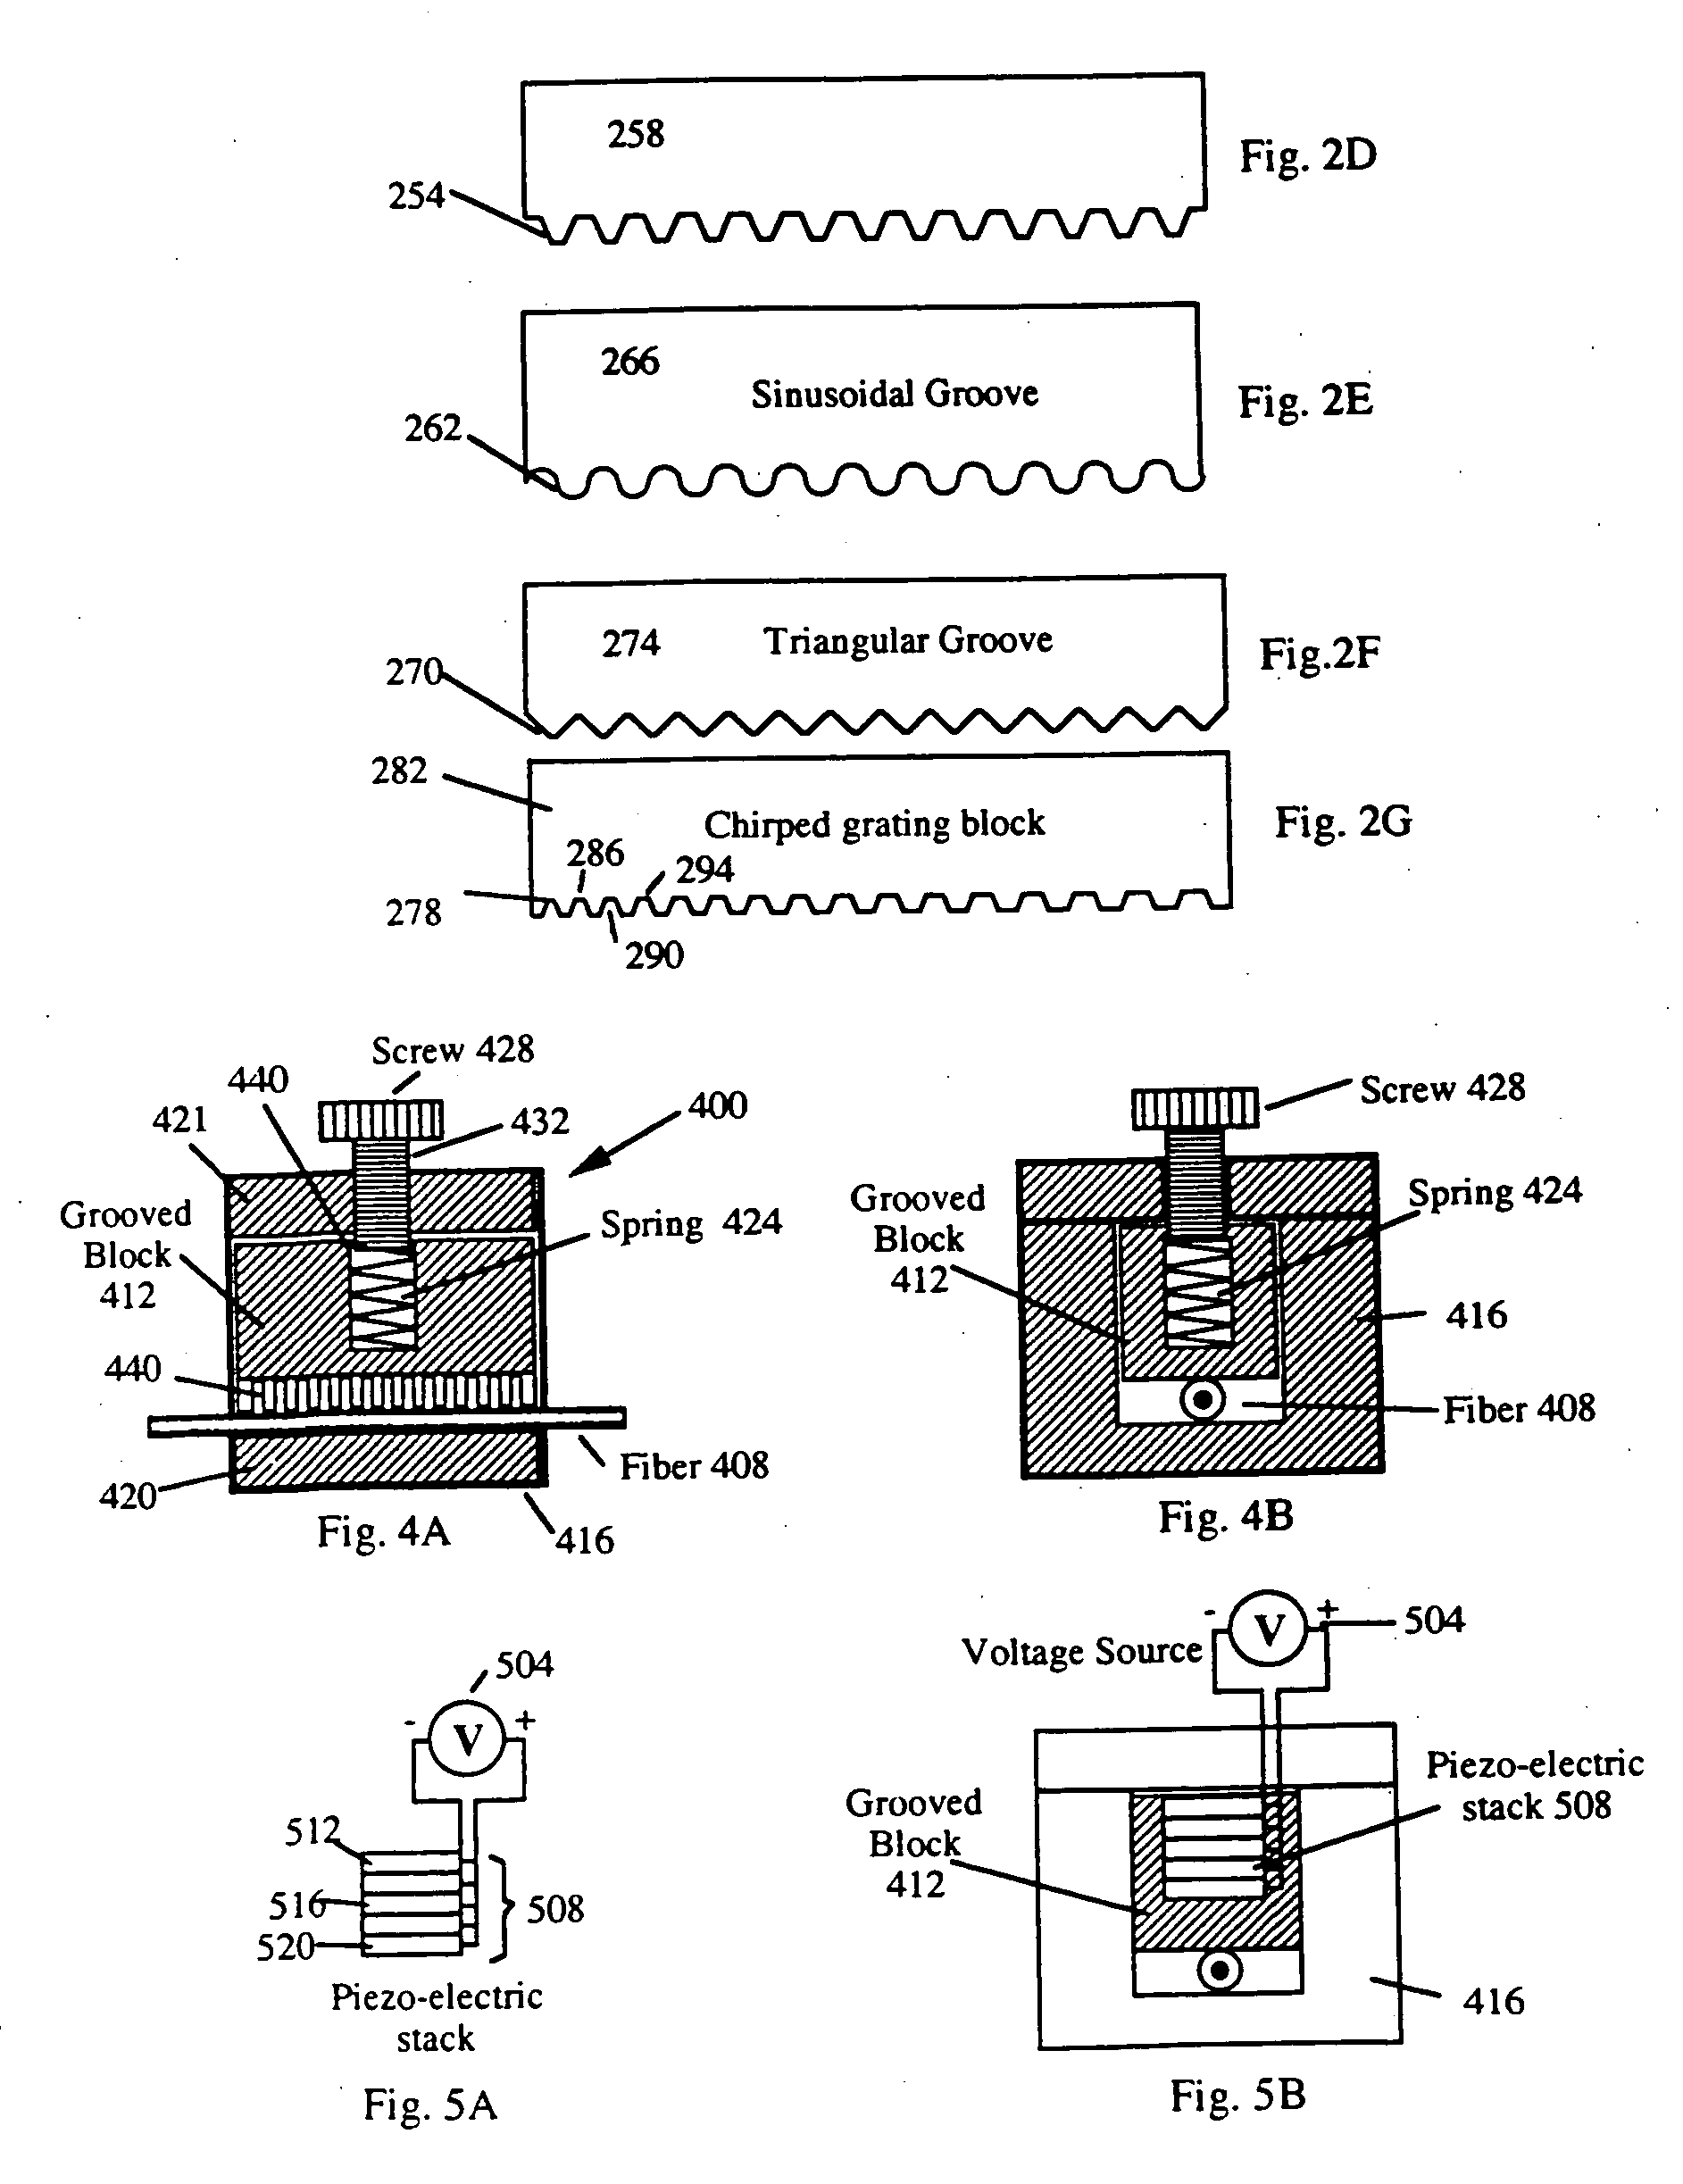 Devices based on optical waveguides with adjustable bragg gratings